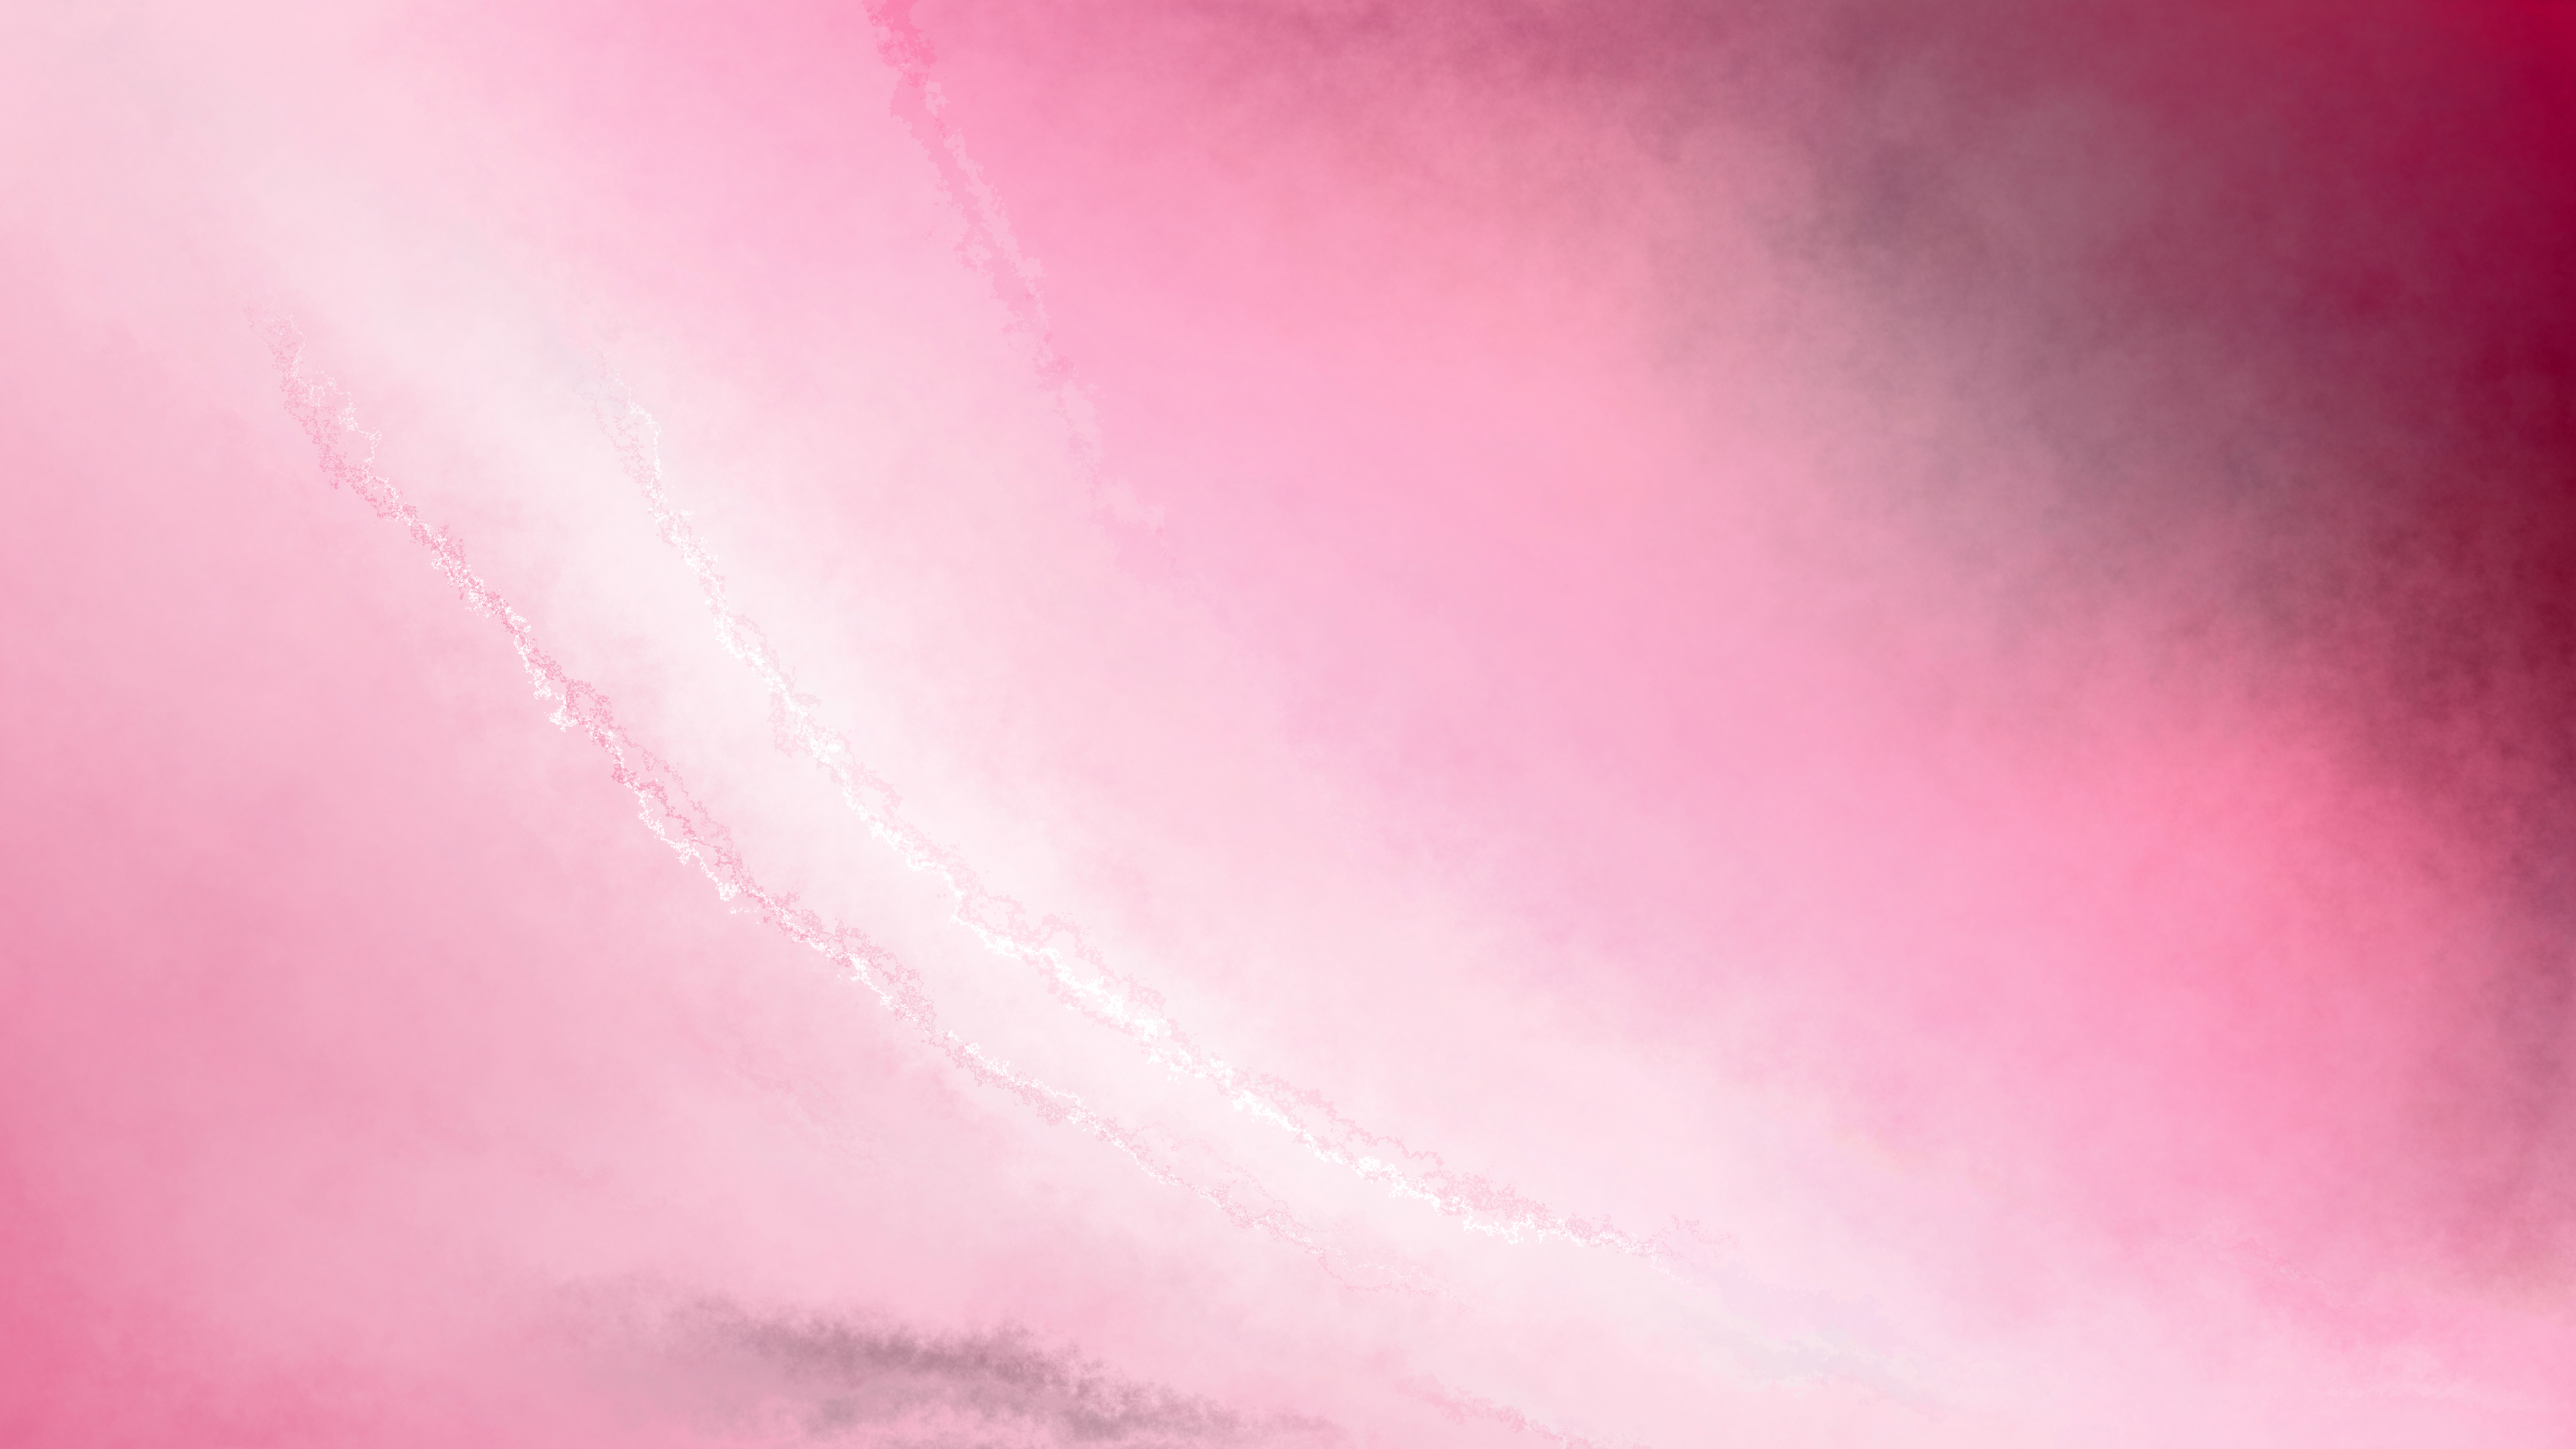 Free Light Pink Grunge Watercolor Background Image.